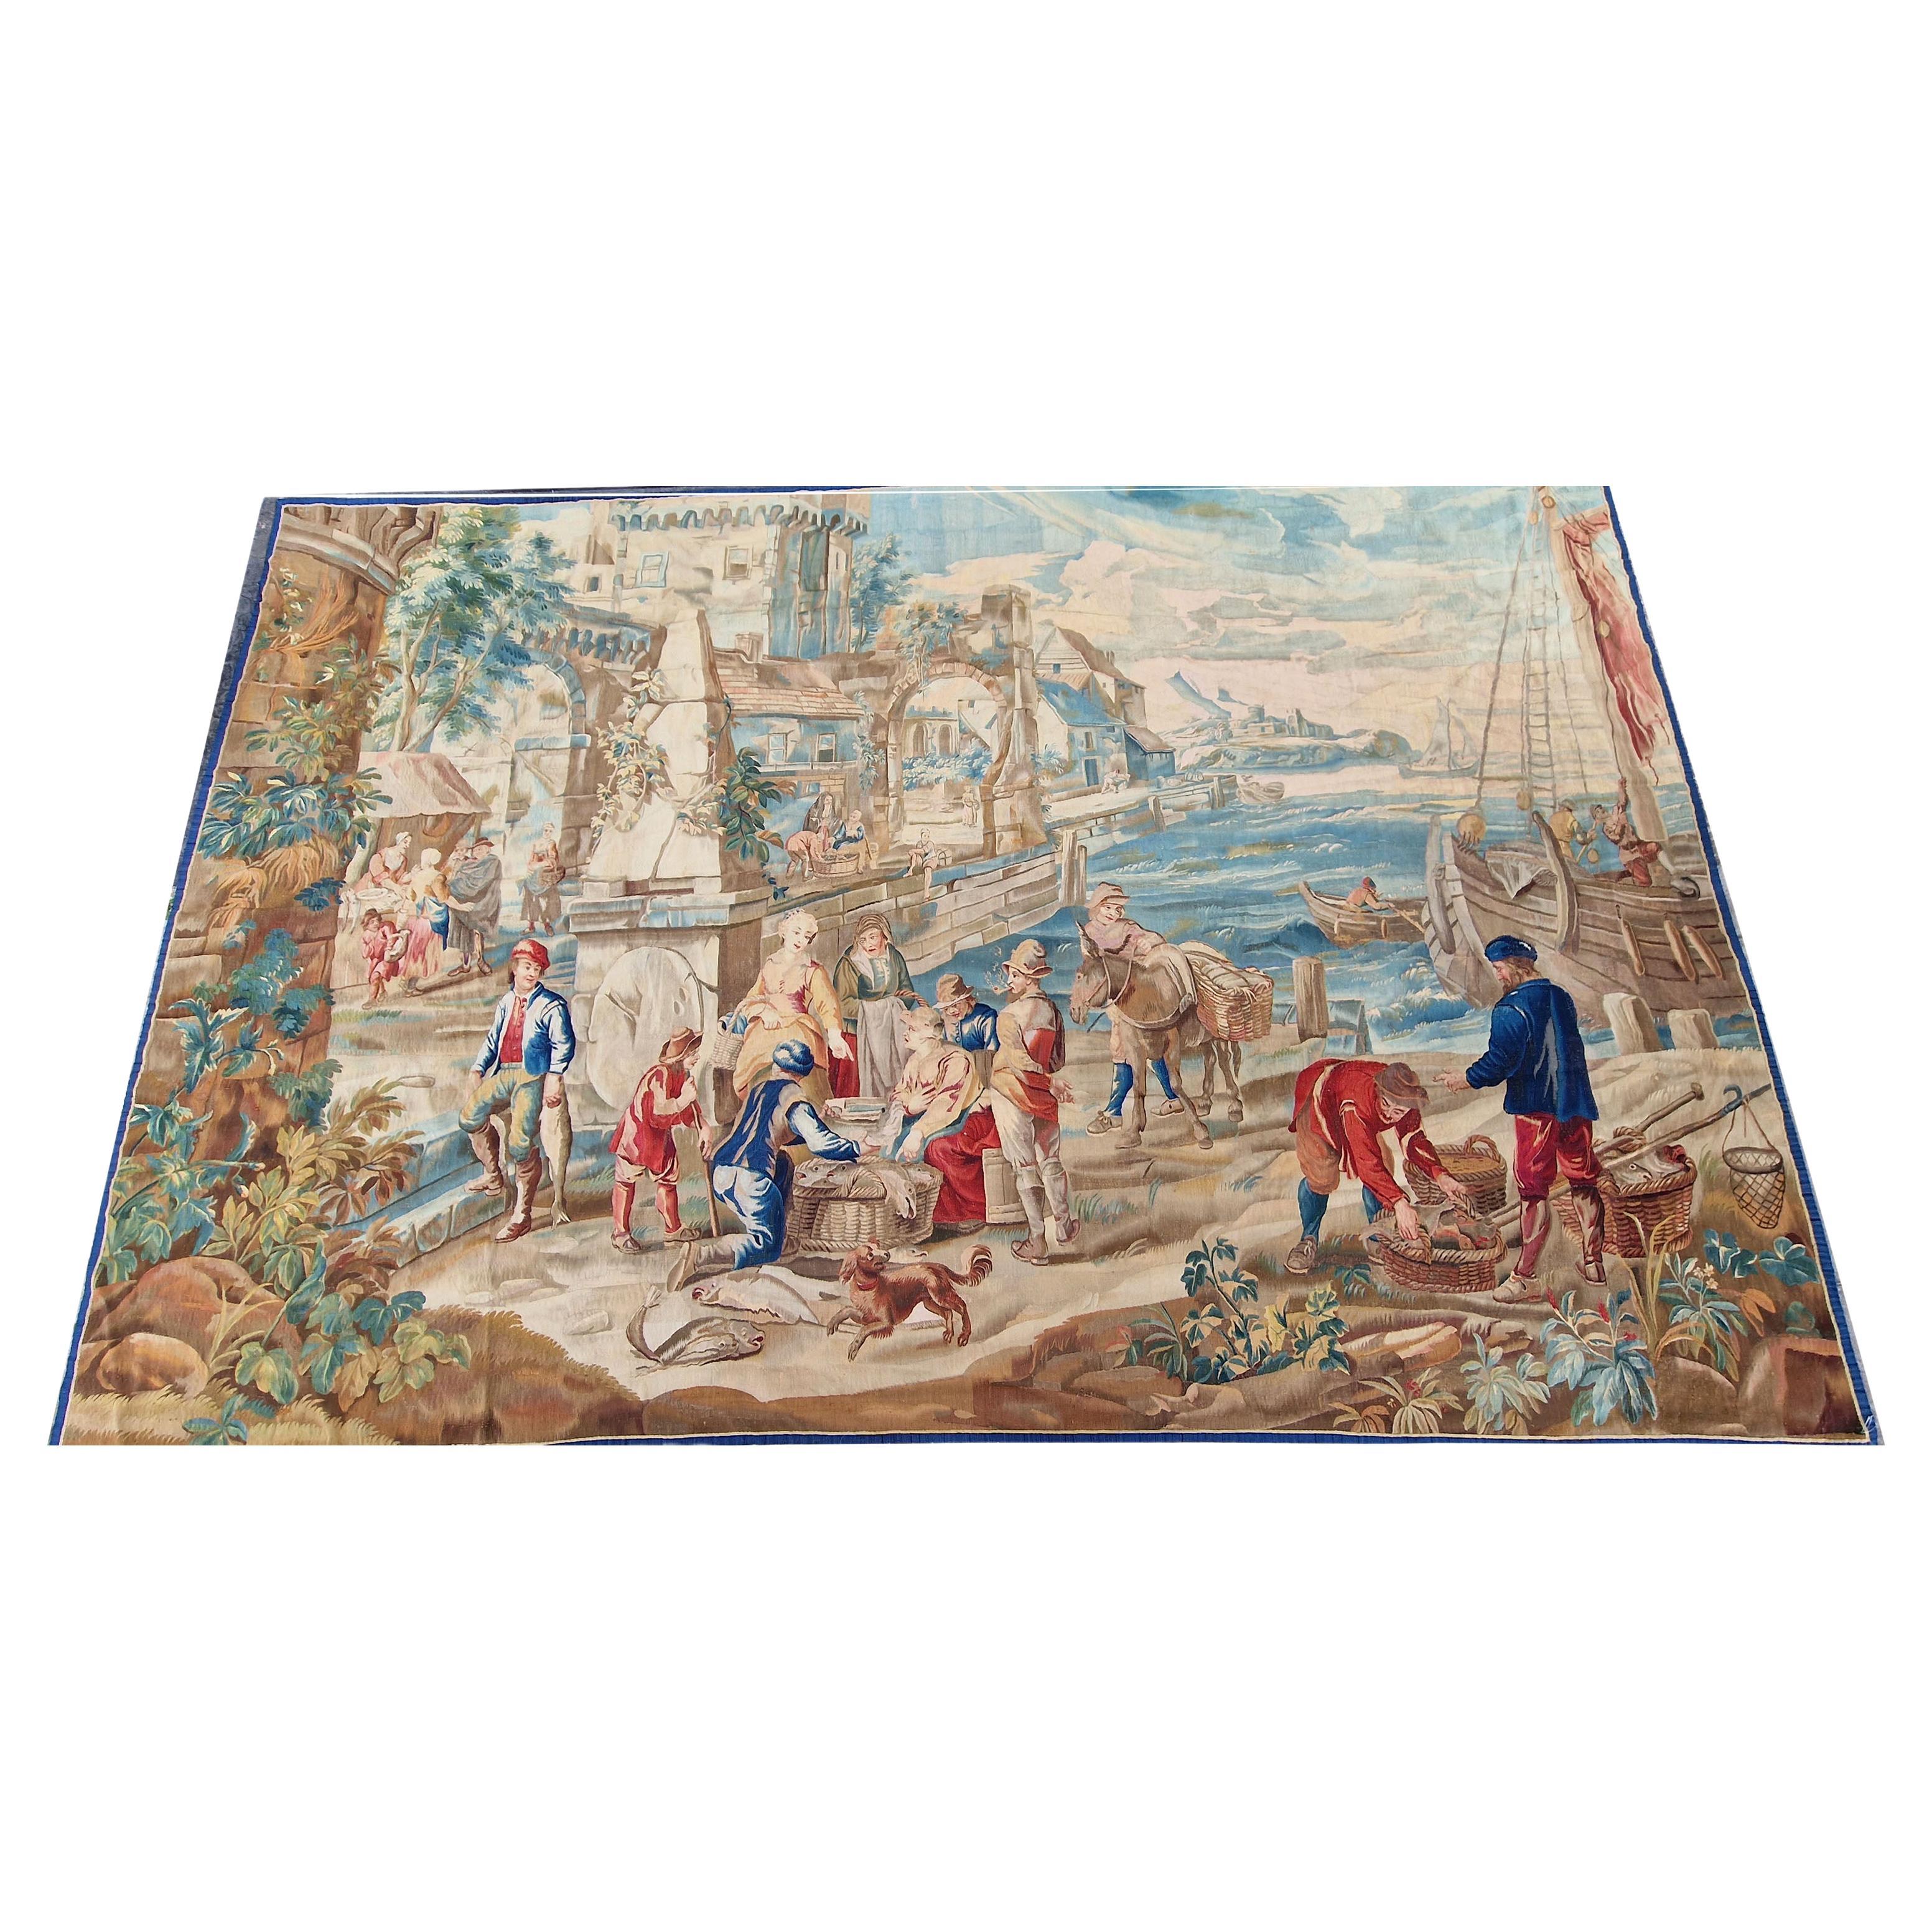 Brussels Circa 1750-Probably woven by Francois Van Der Borcht 1720-1765-Tenier's Style-A placid harbor with a perspectival weighted fortified city scape to left and a stone quay in the foreground with fish mongers and bargaining buyers, along with a